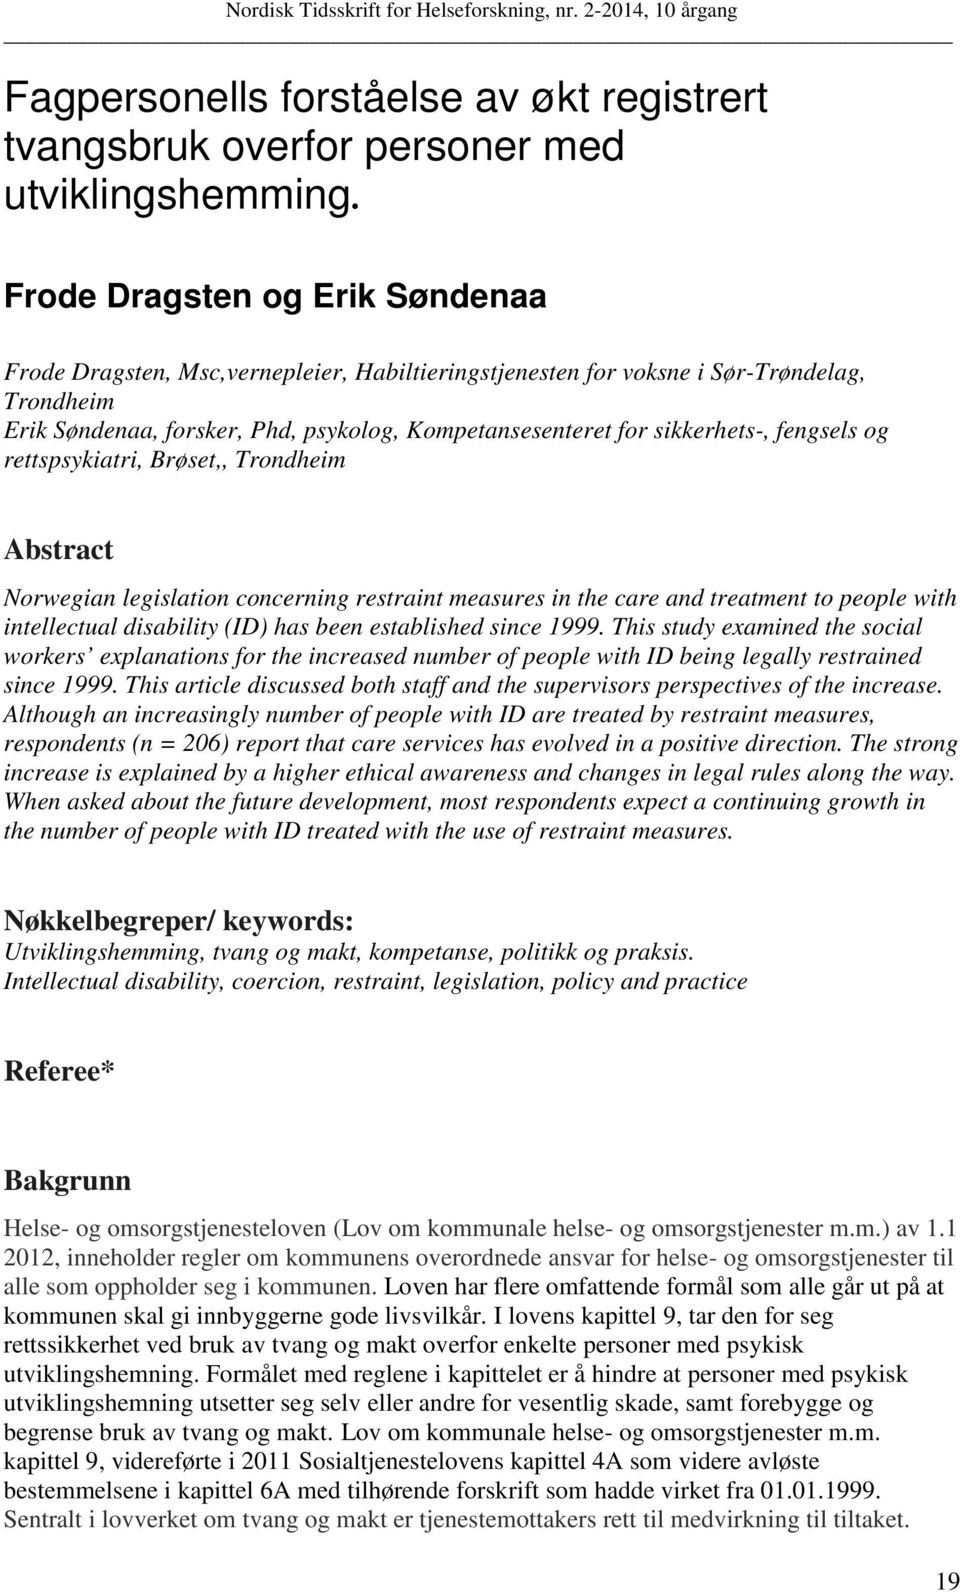 sikkerhets-, fengsels og rettspsykiatri, Brøset,, Trondheim Abstract Norwegian legislation concerning restraint measures in the care and treatment to people with intellectual disability (ID) has been